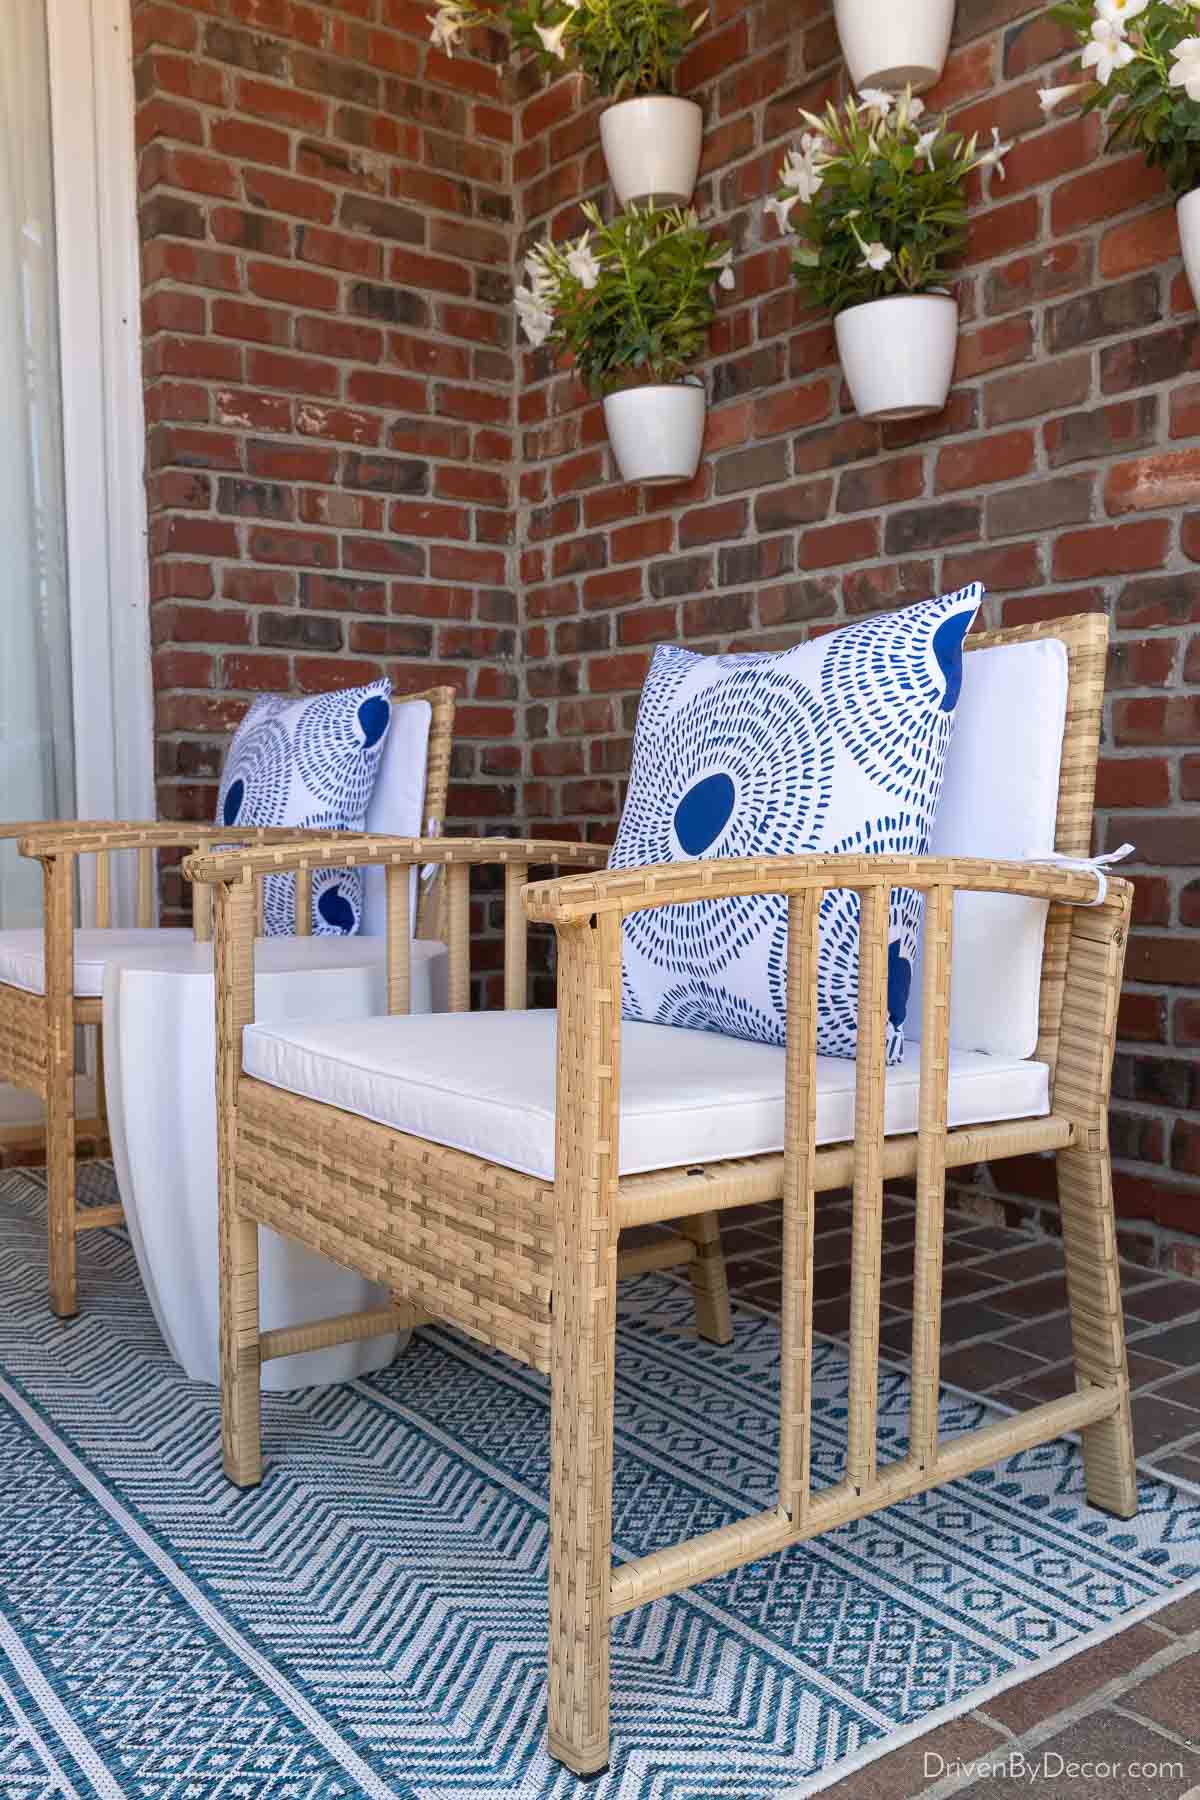 Pair of woven patio chairs on back porch